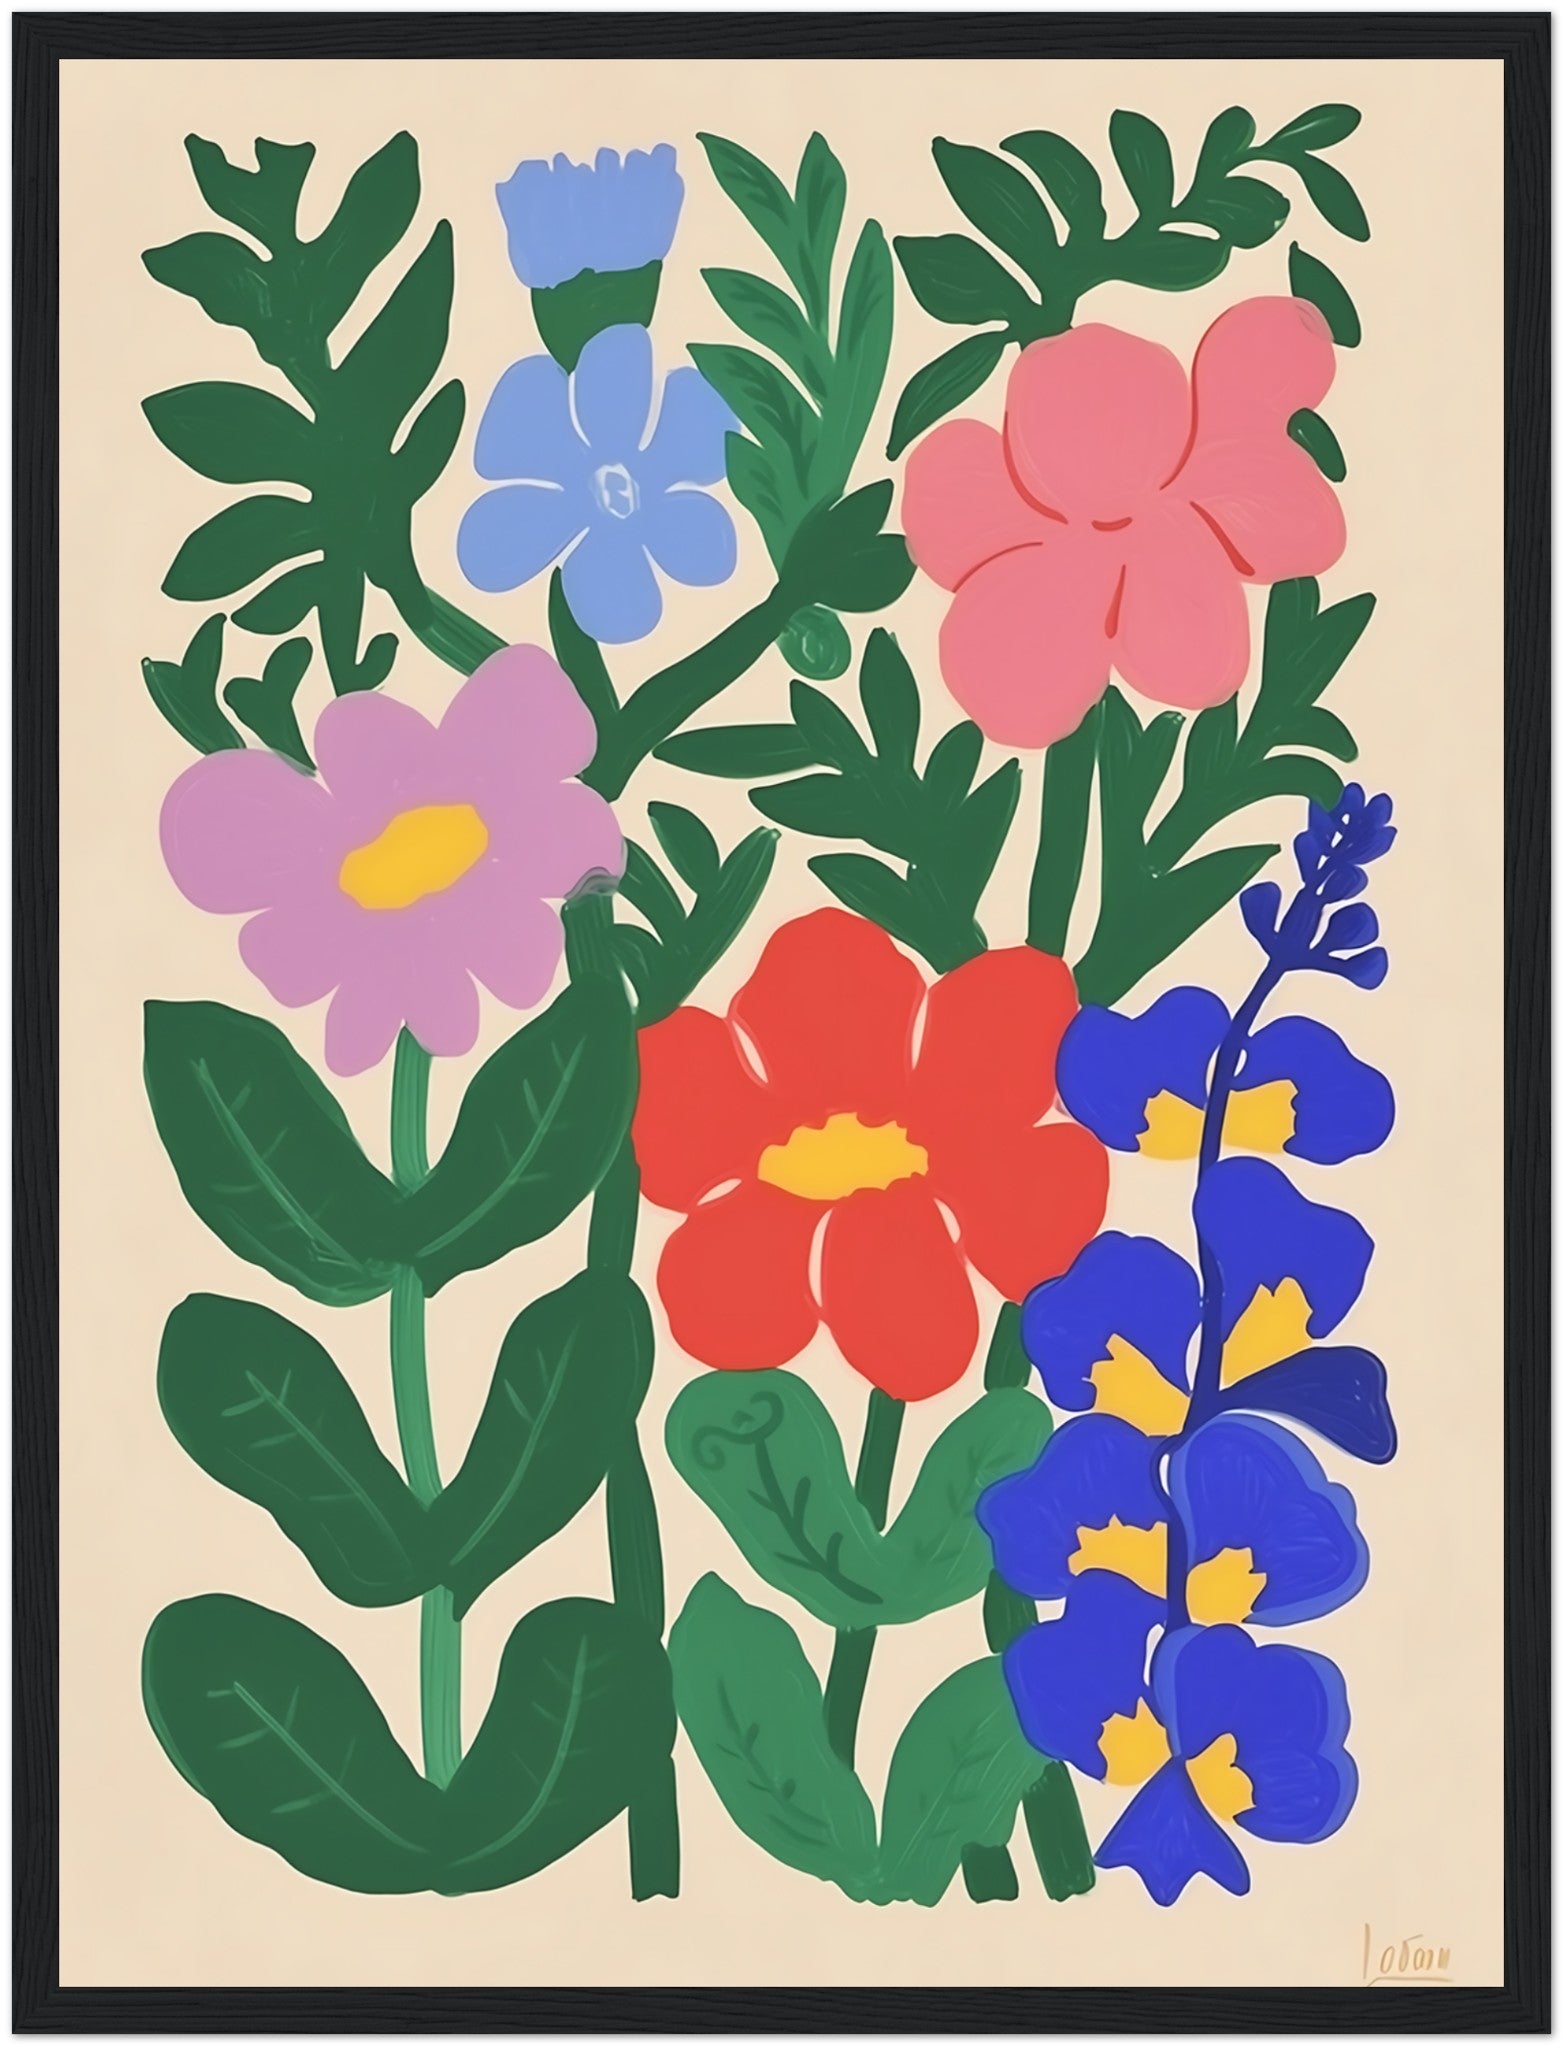 Colorful illustrated flowers and leaves in a decorative, simple style on a light background, framed.